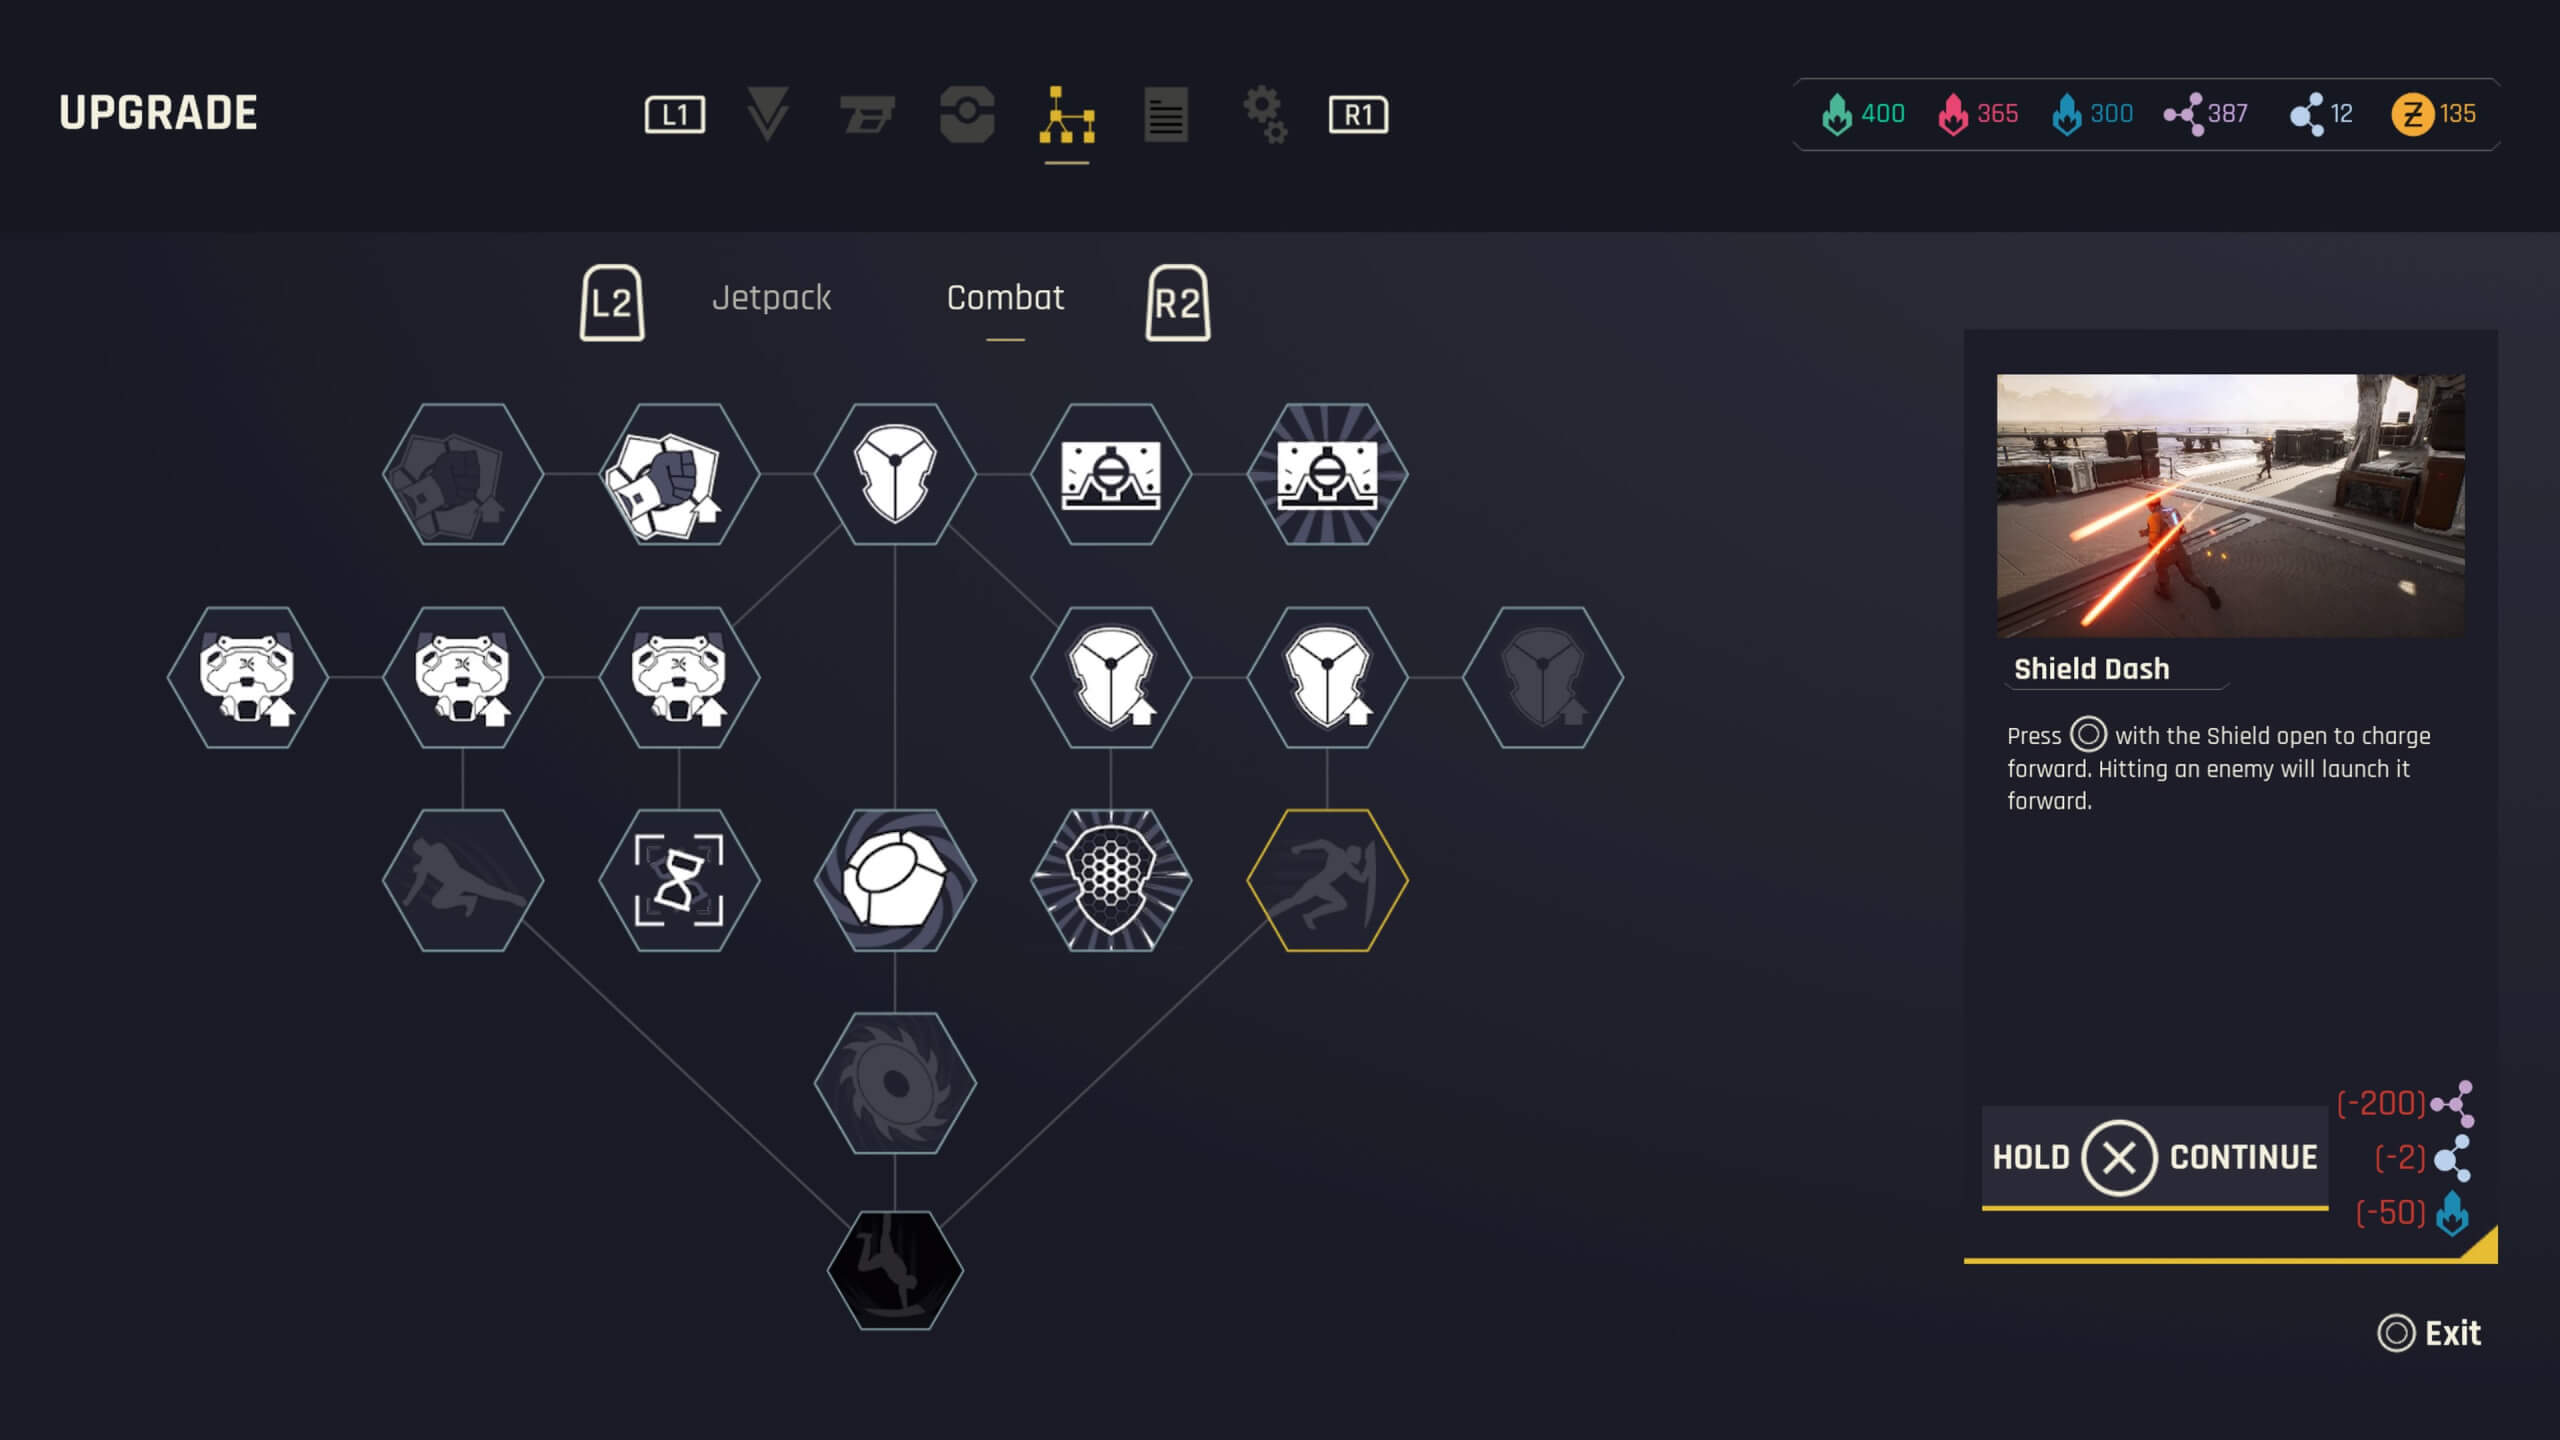 This is the skill tree for the shield. I have purchased a couple, and any I haven't are dimmed out. In the top are various symbols for the different tabs. The far right displays how much I have for specific resources.